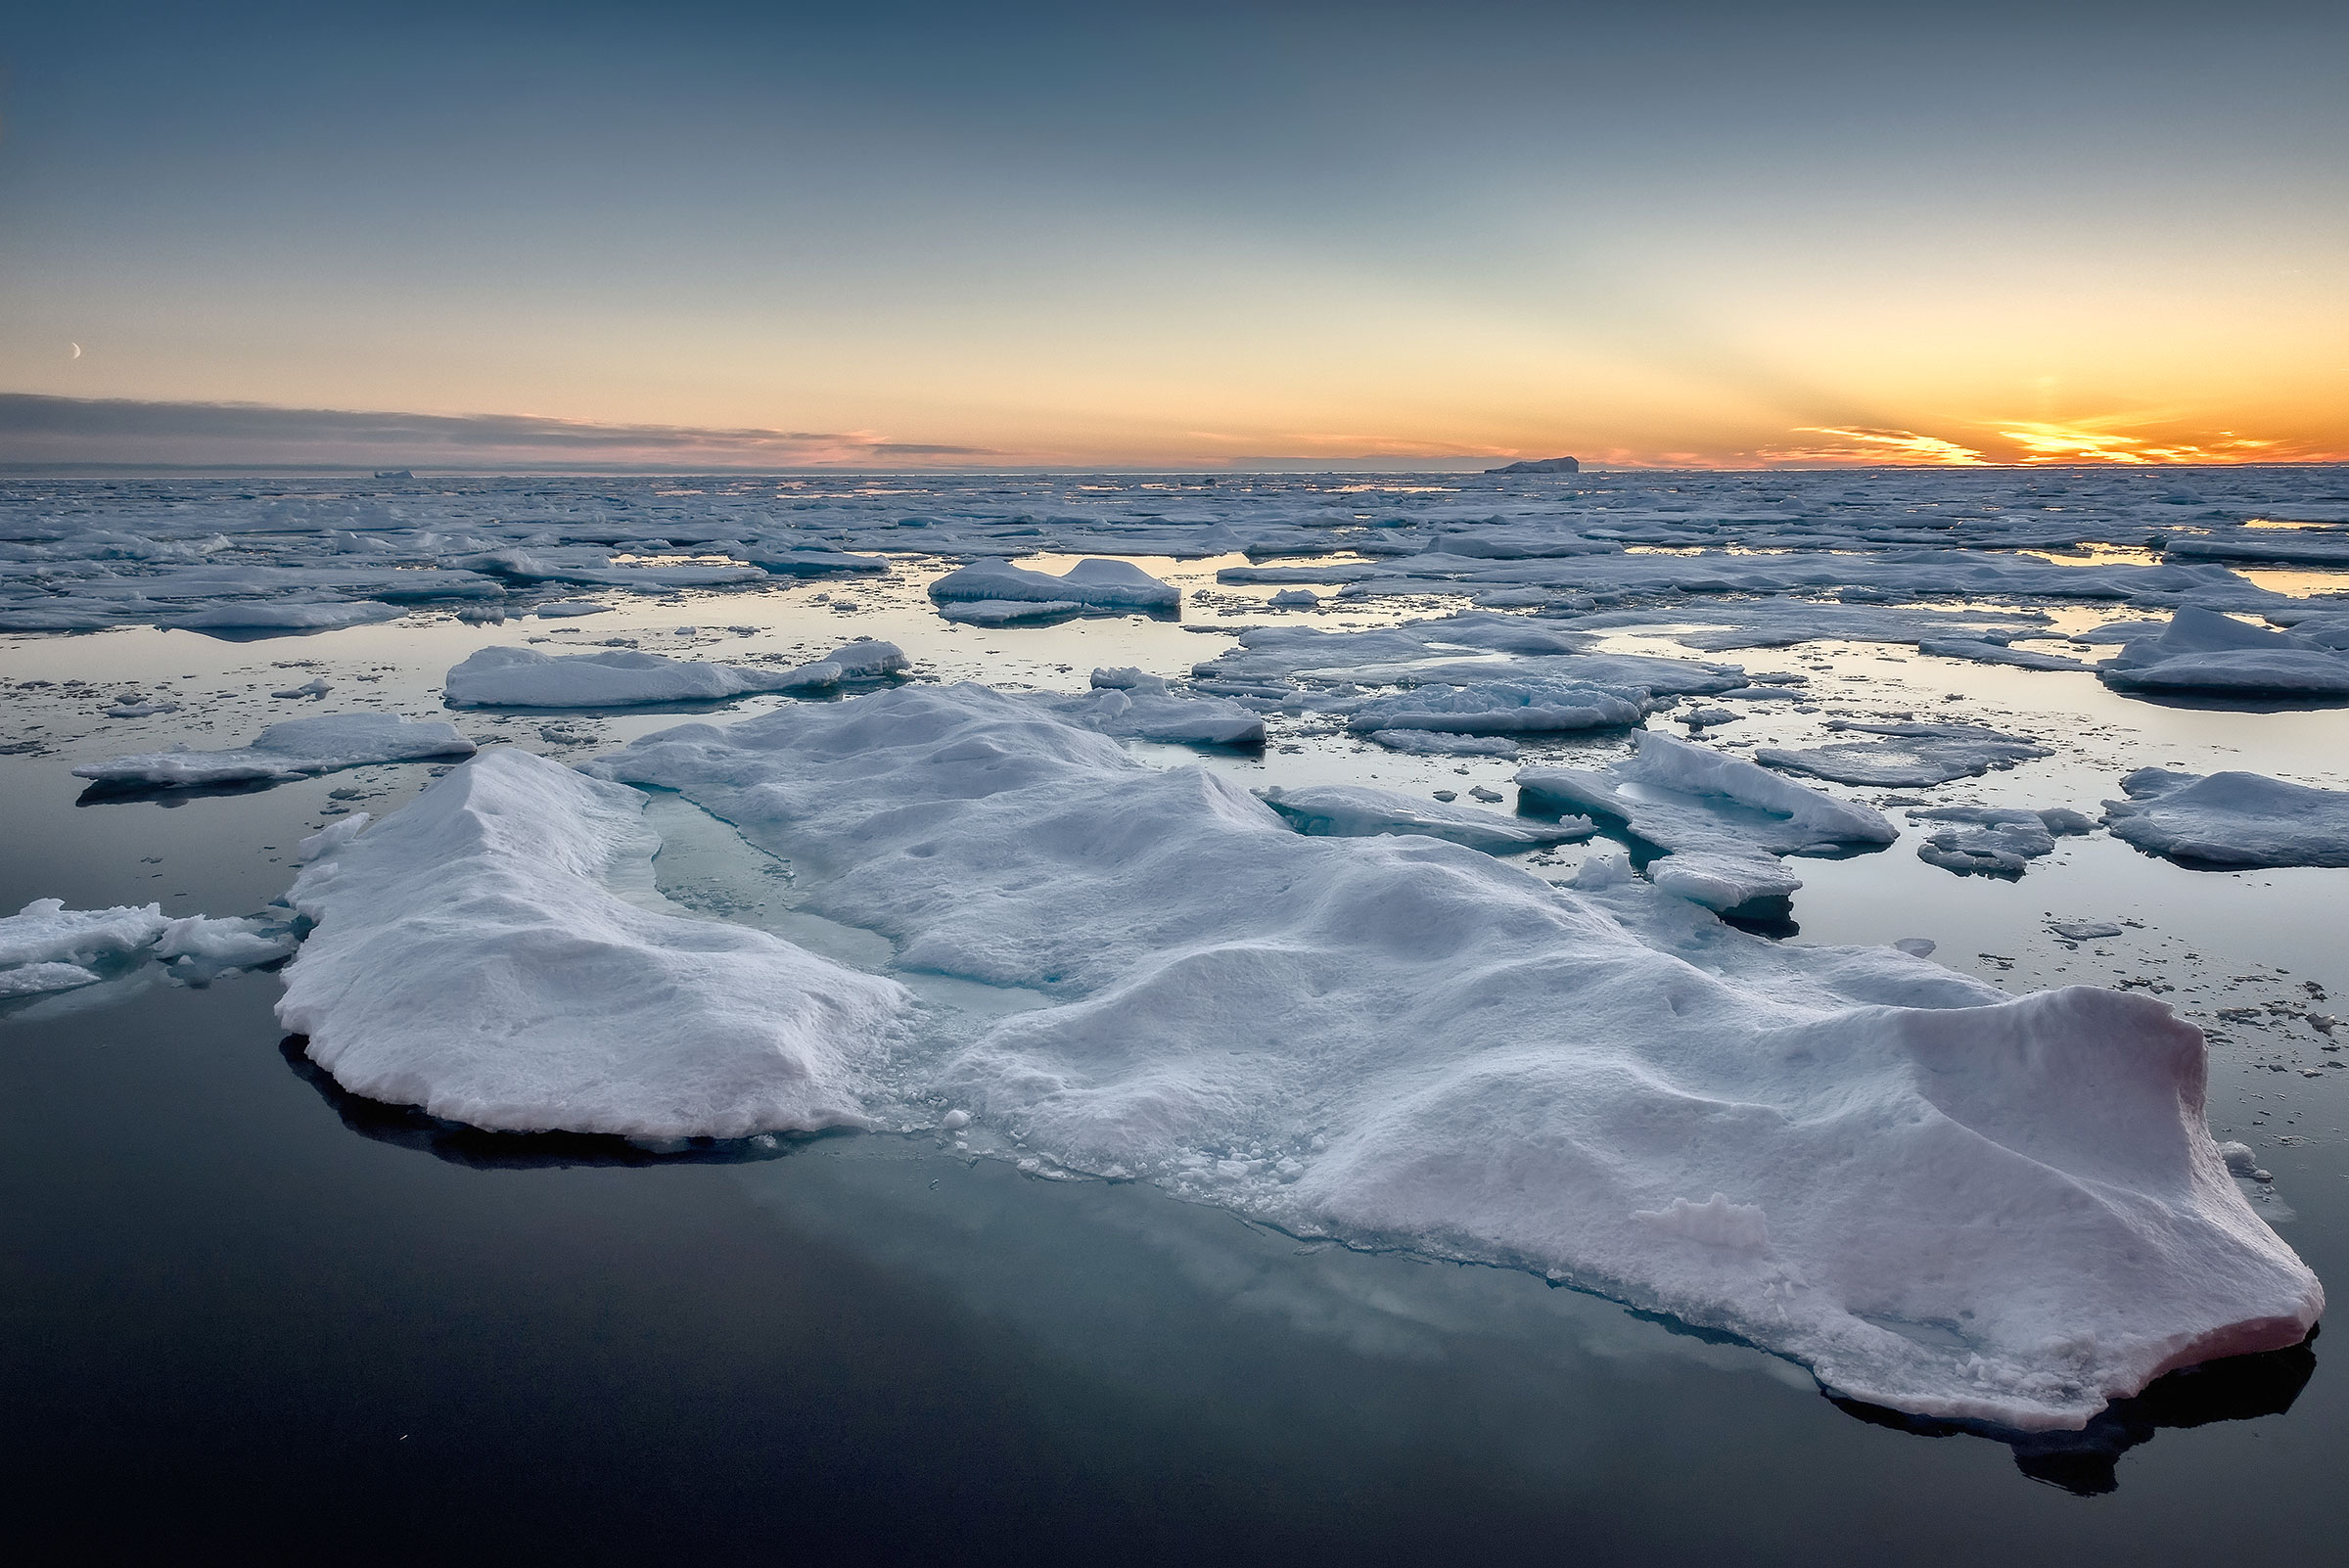 Sunset over ice-covered ocean